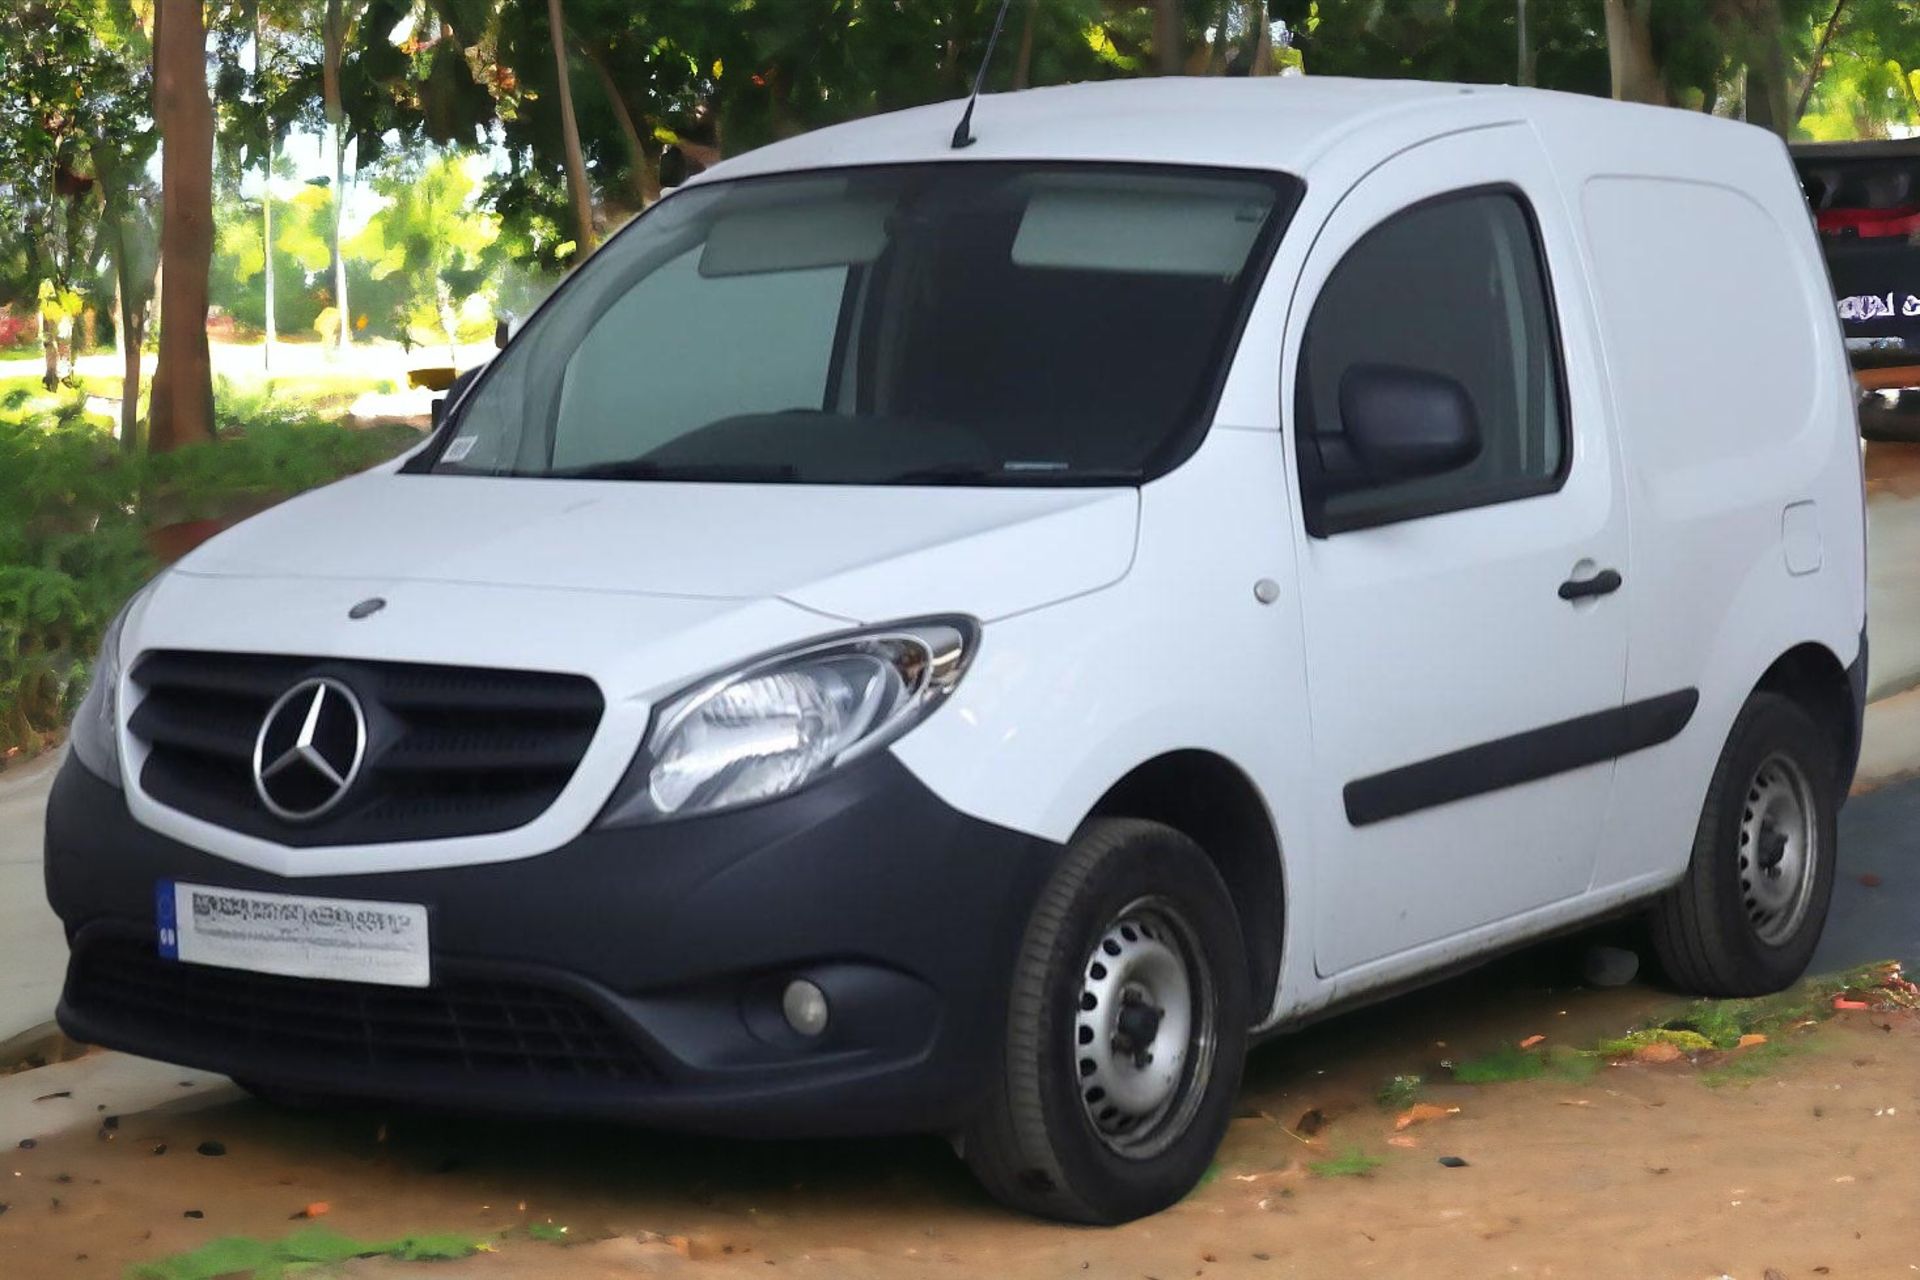 MERCEDES-BENZ CITAN 109CDI COMPACT: COMPACT AND EFFICIENT WORK COMPANION - Image 5 of 11